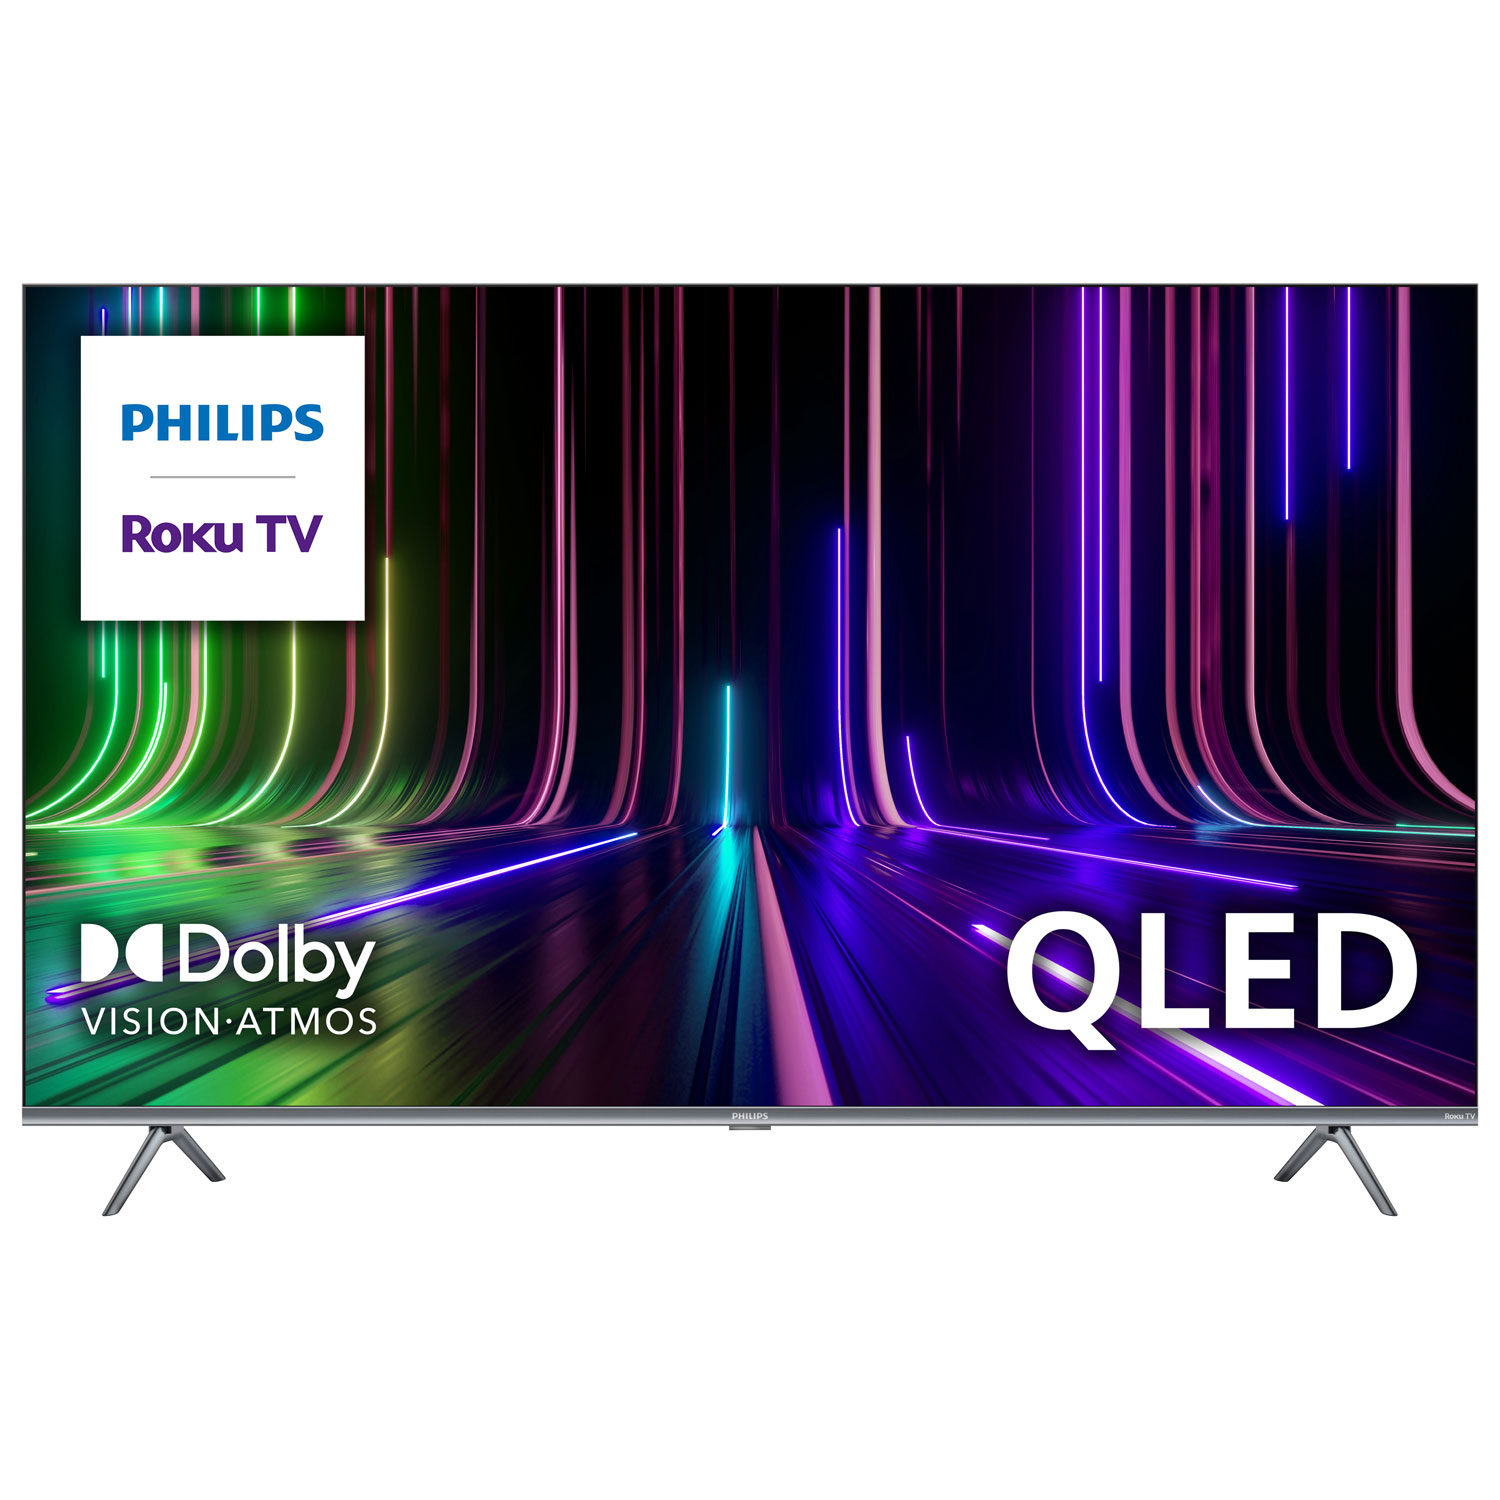 Philips 75" 4K UHD HDR QLED Roku Smart TV (75PUL7973/F6) - 2023 - Only at Best Buy